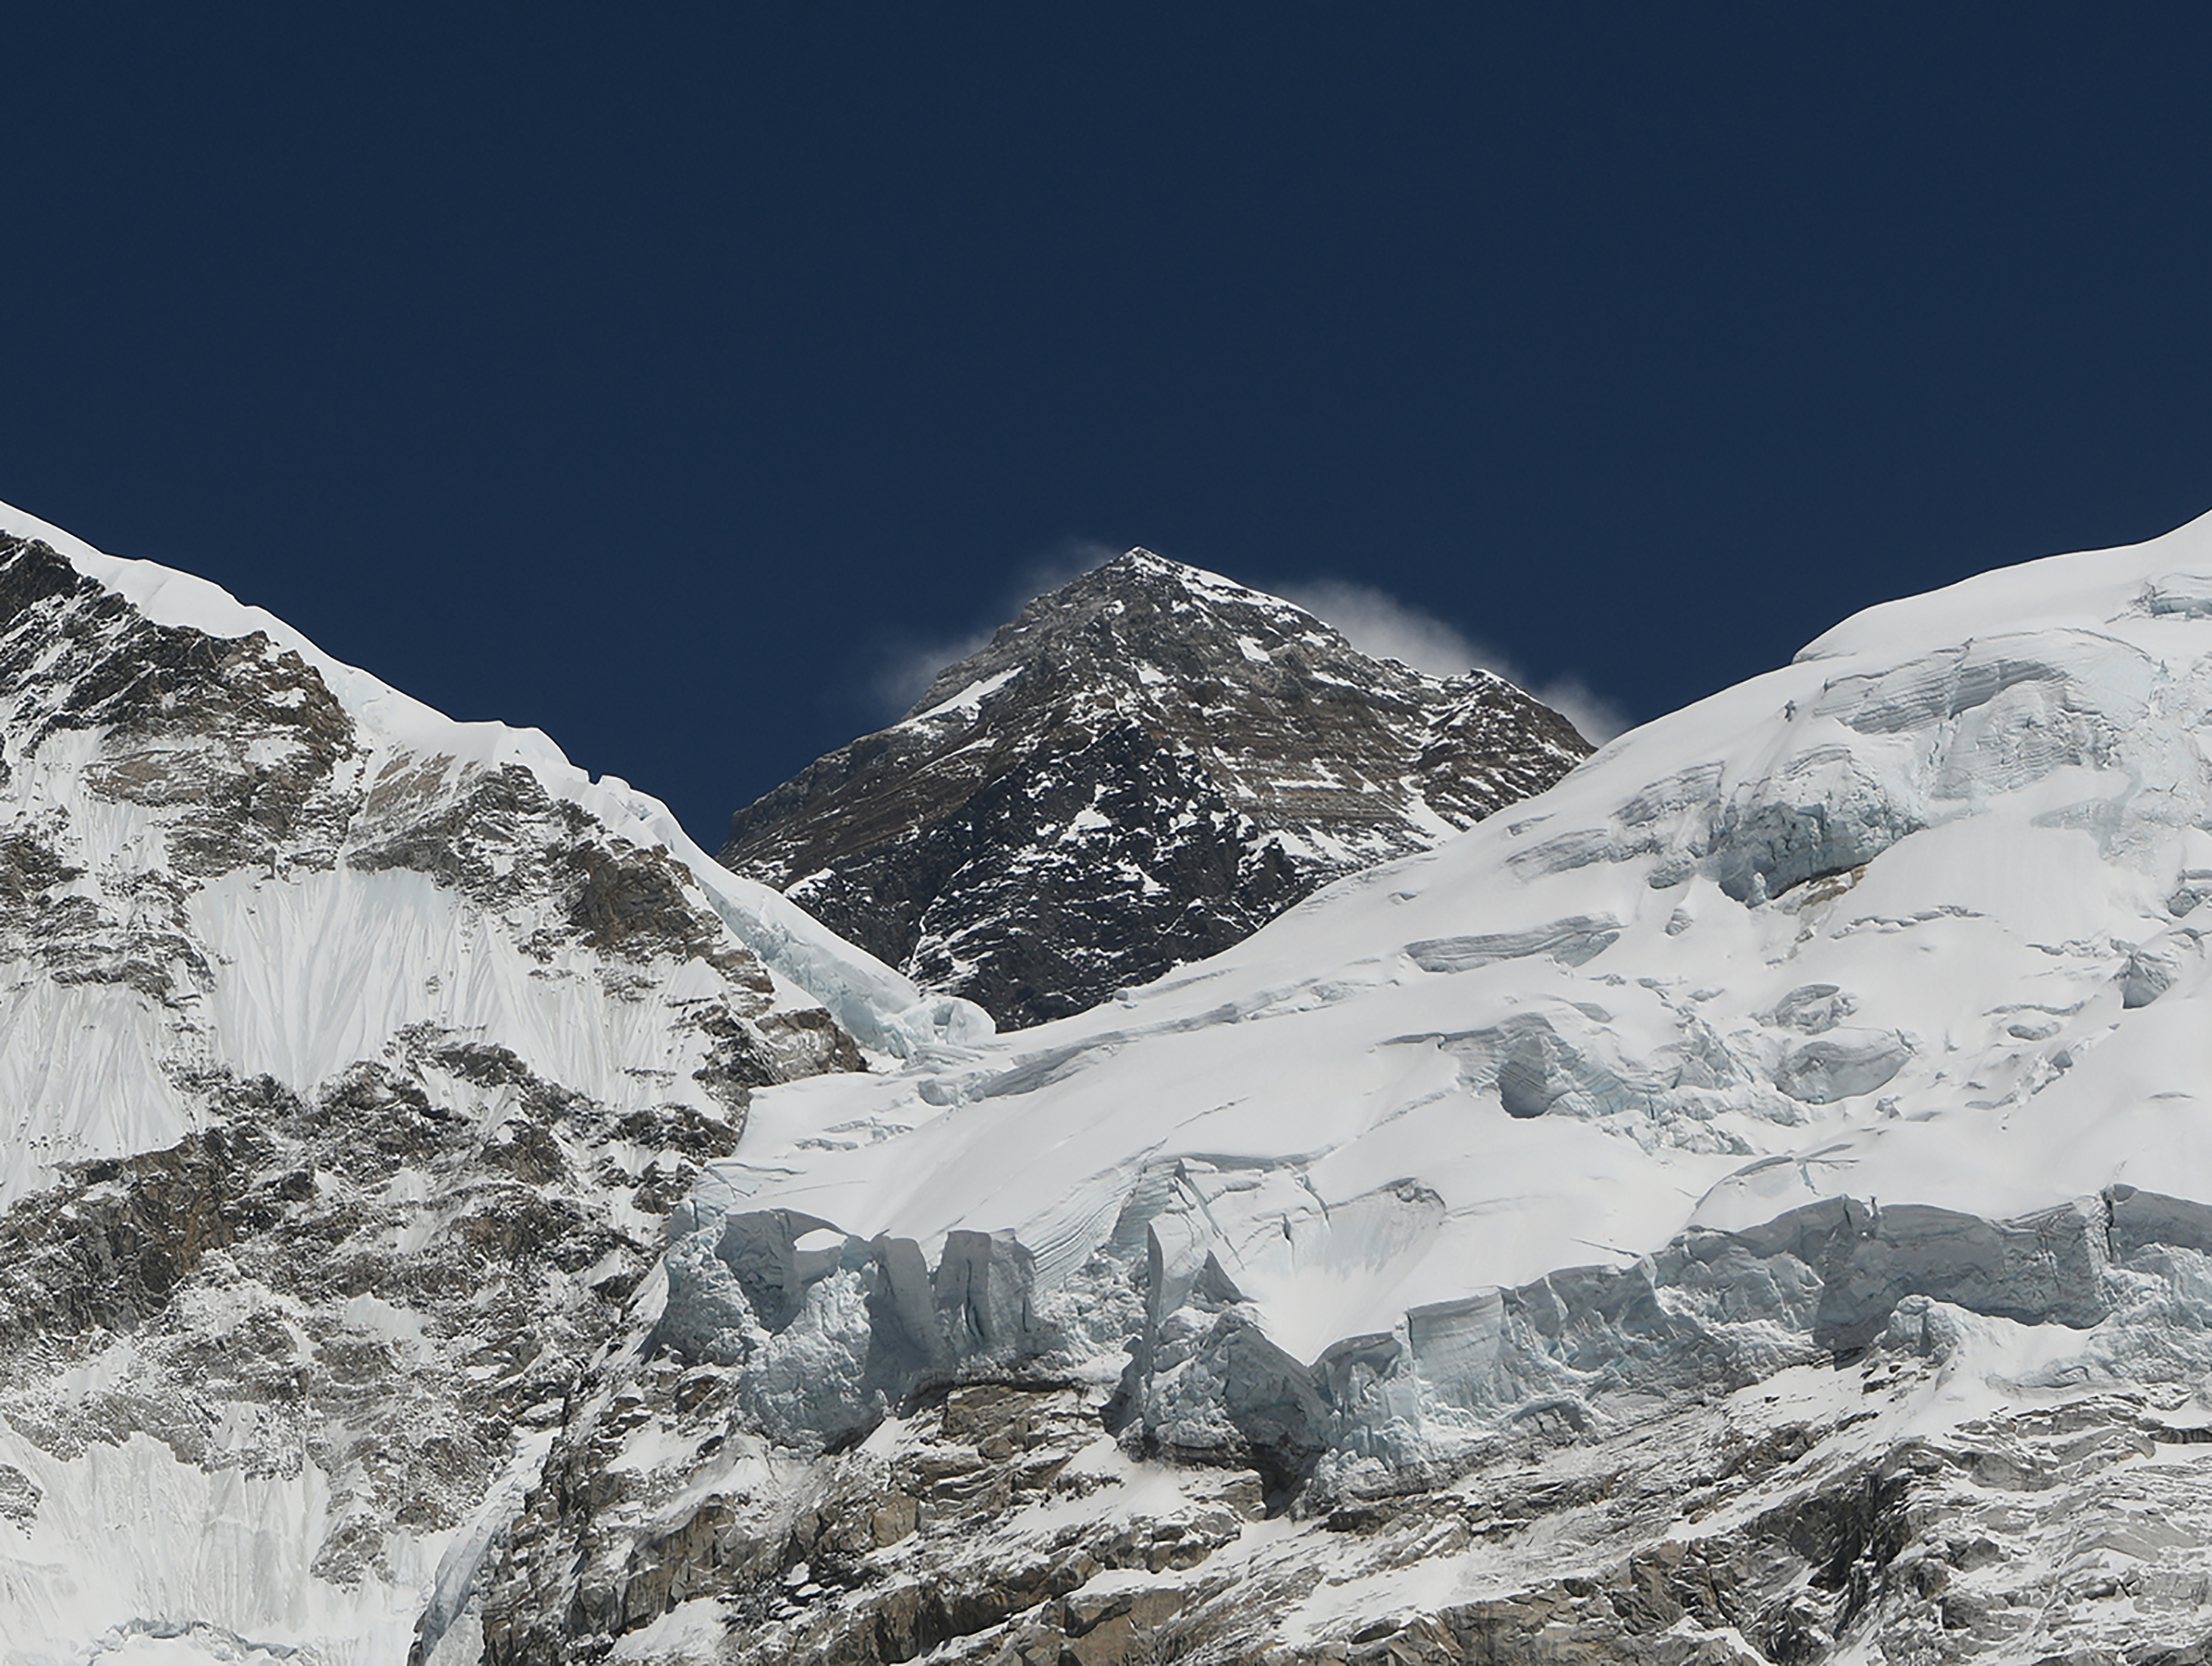 In this photograph taken on April 21, 2018, Mount Everest (height 8848 metres) is seen in the Everest region some 140 km northeast of the Nepali capital Kathmandu. (Prakash Mathema—AFP/Getty Images)